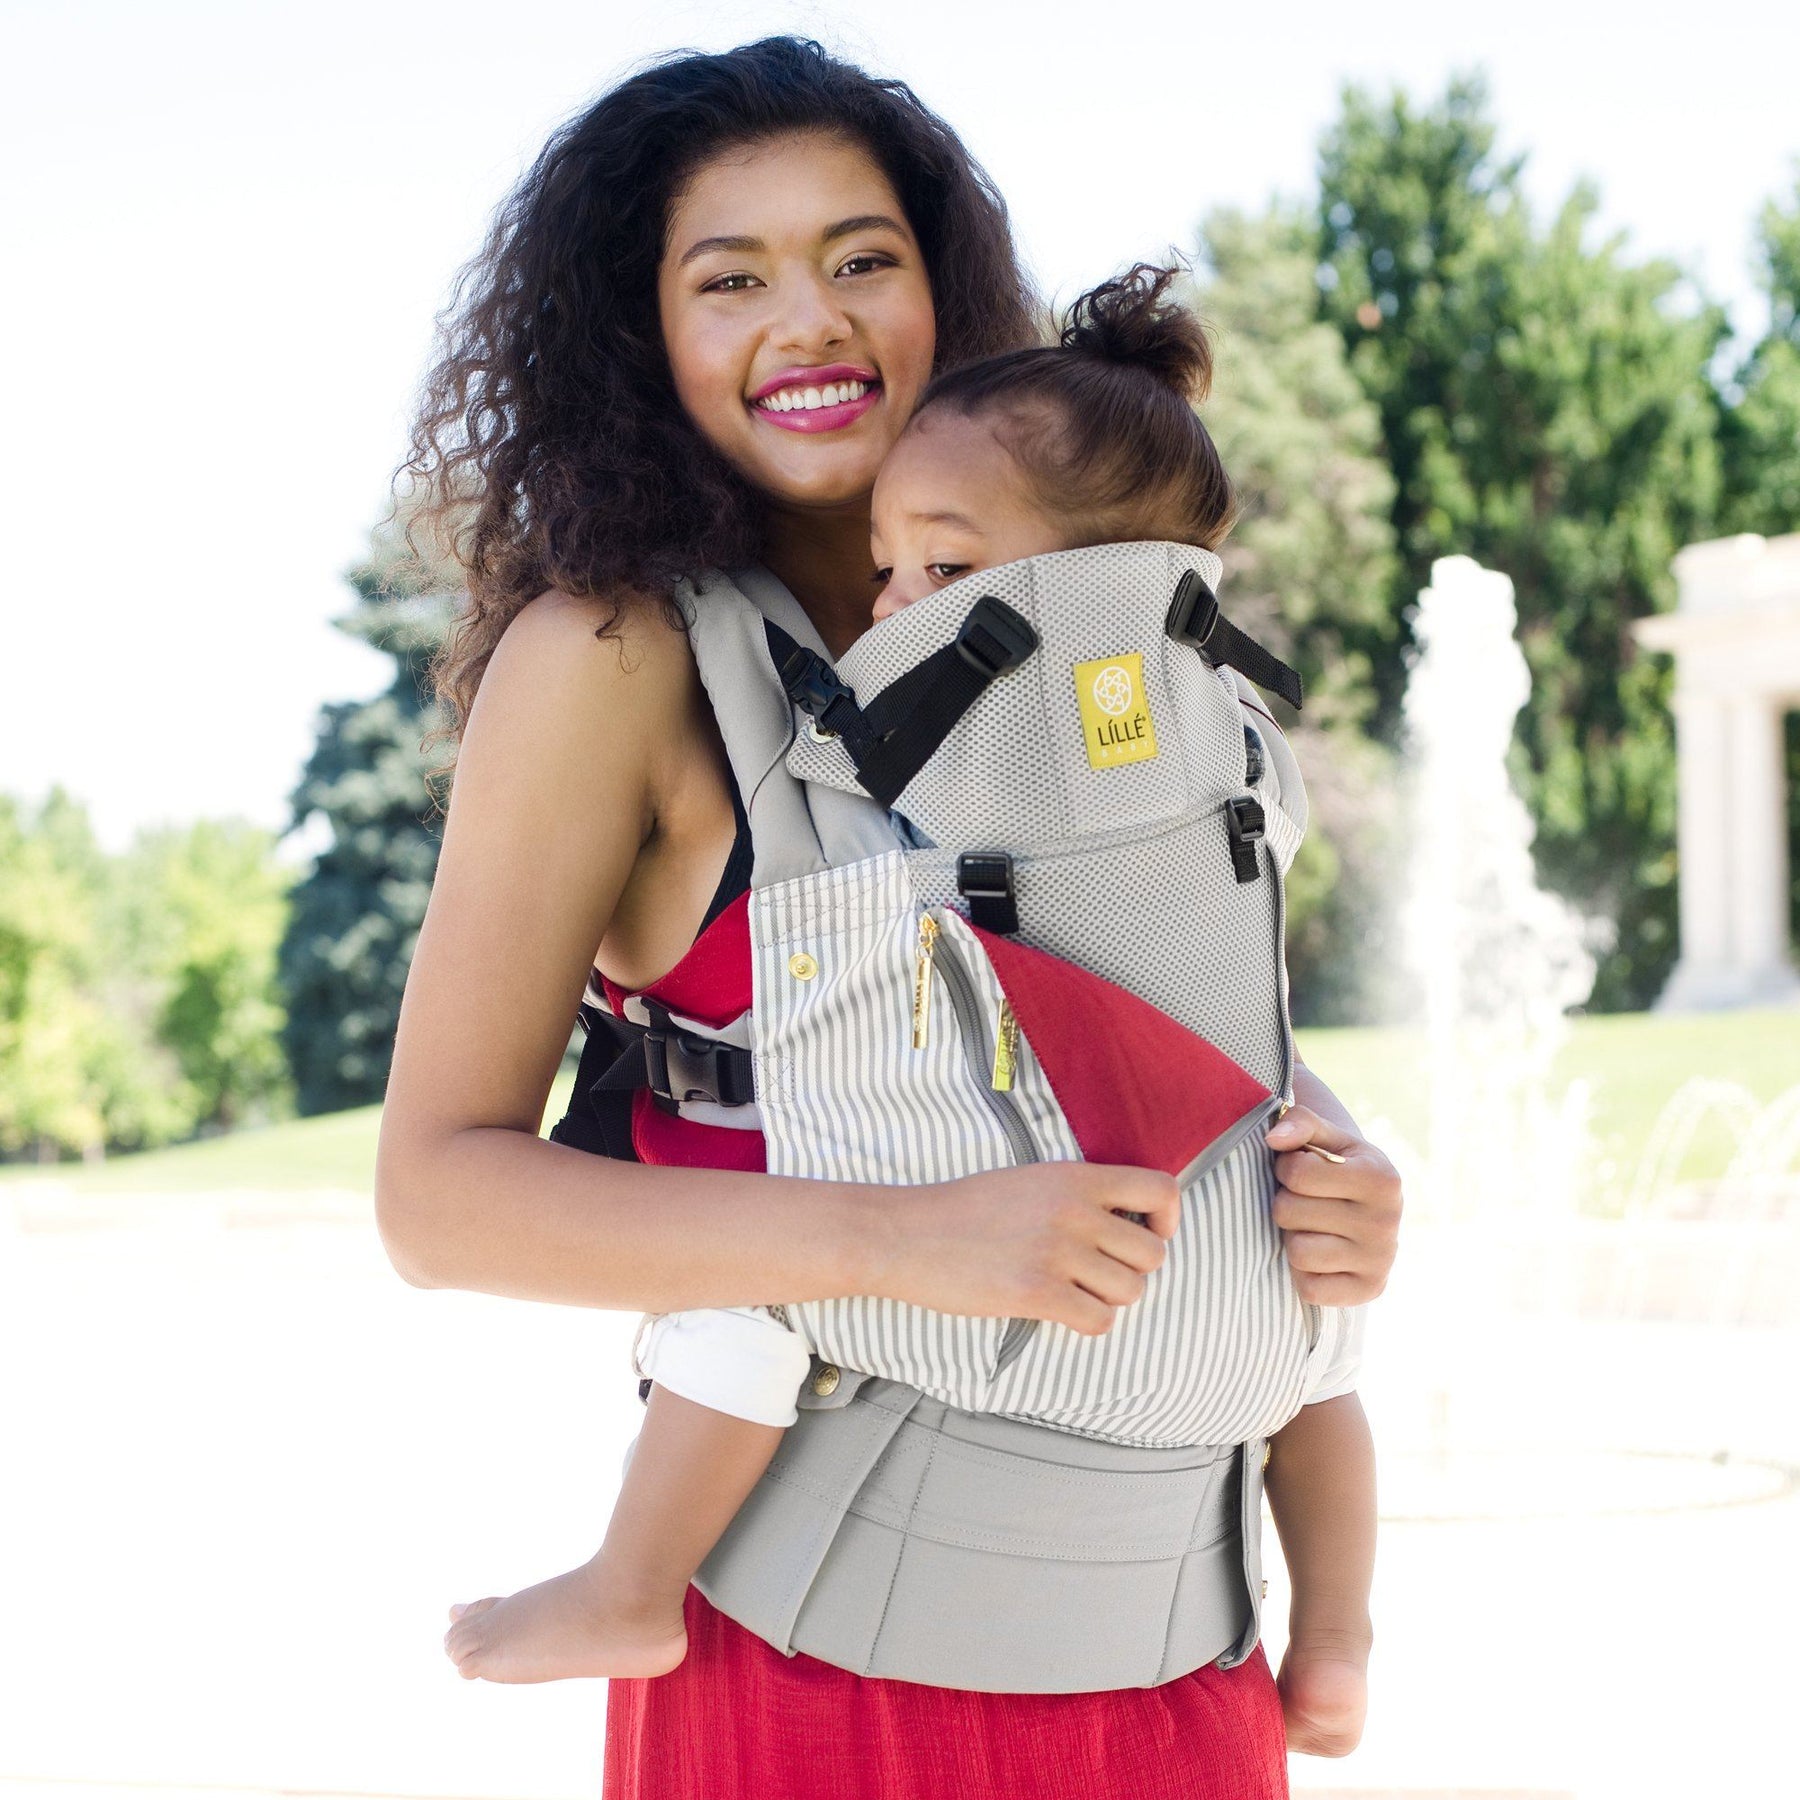 ergonomic baby and child carrier by lillebaby